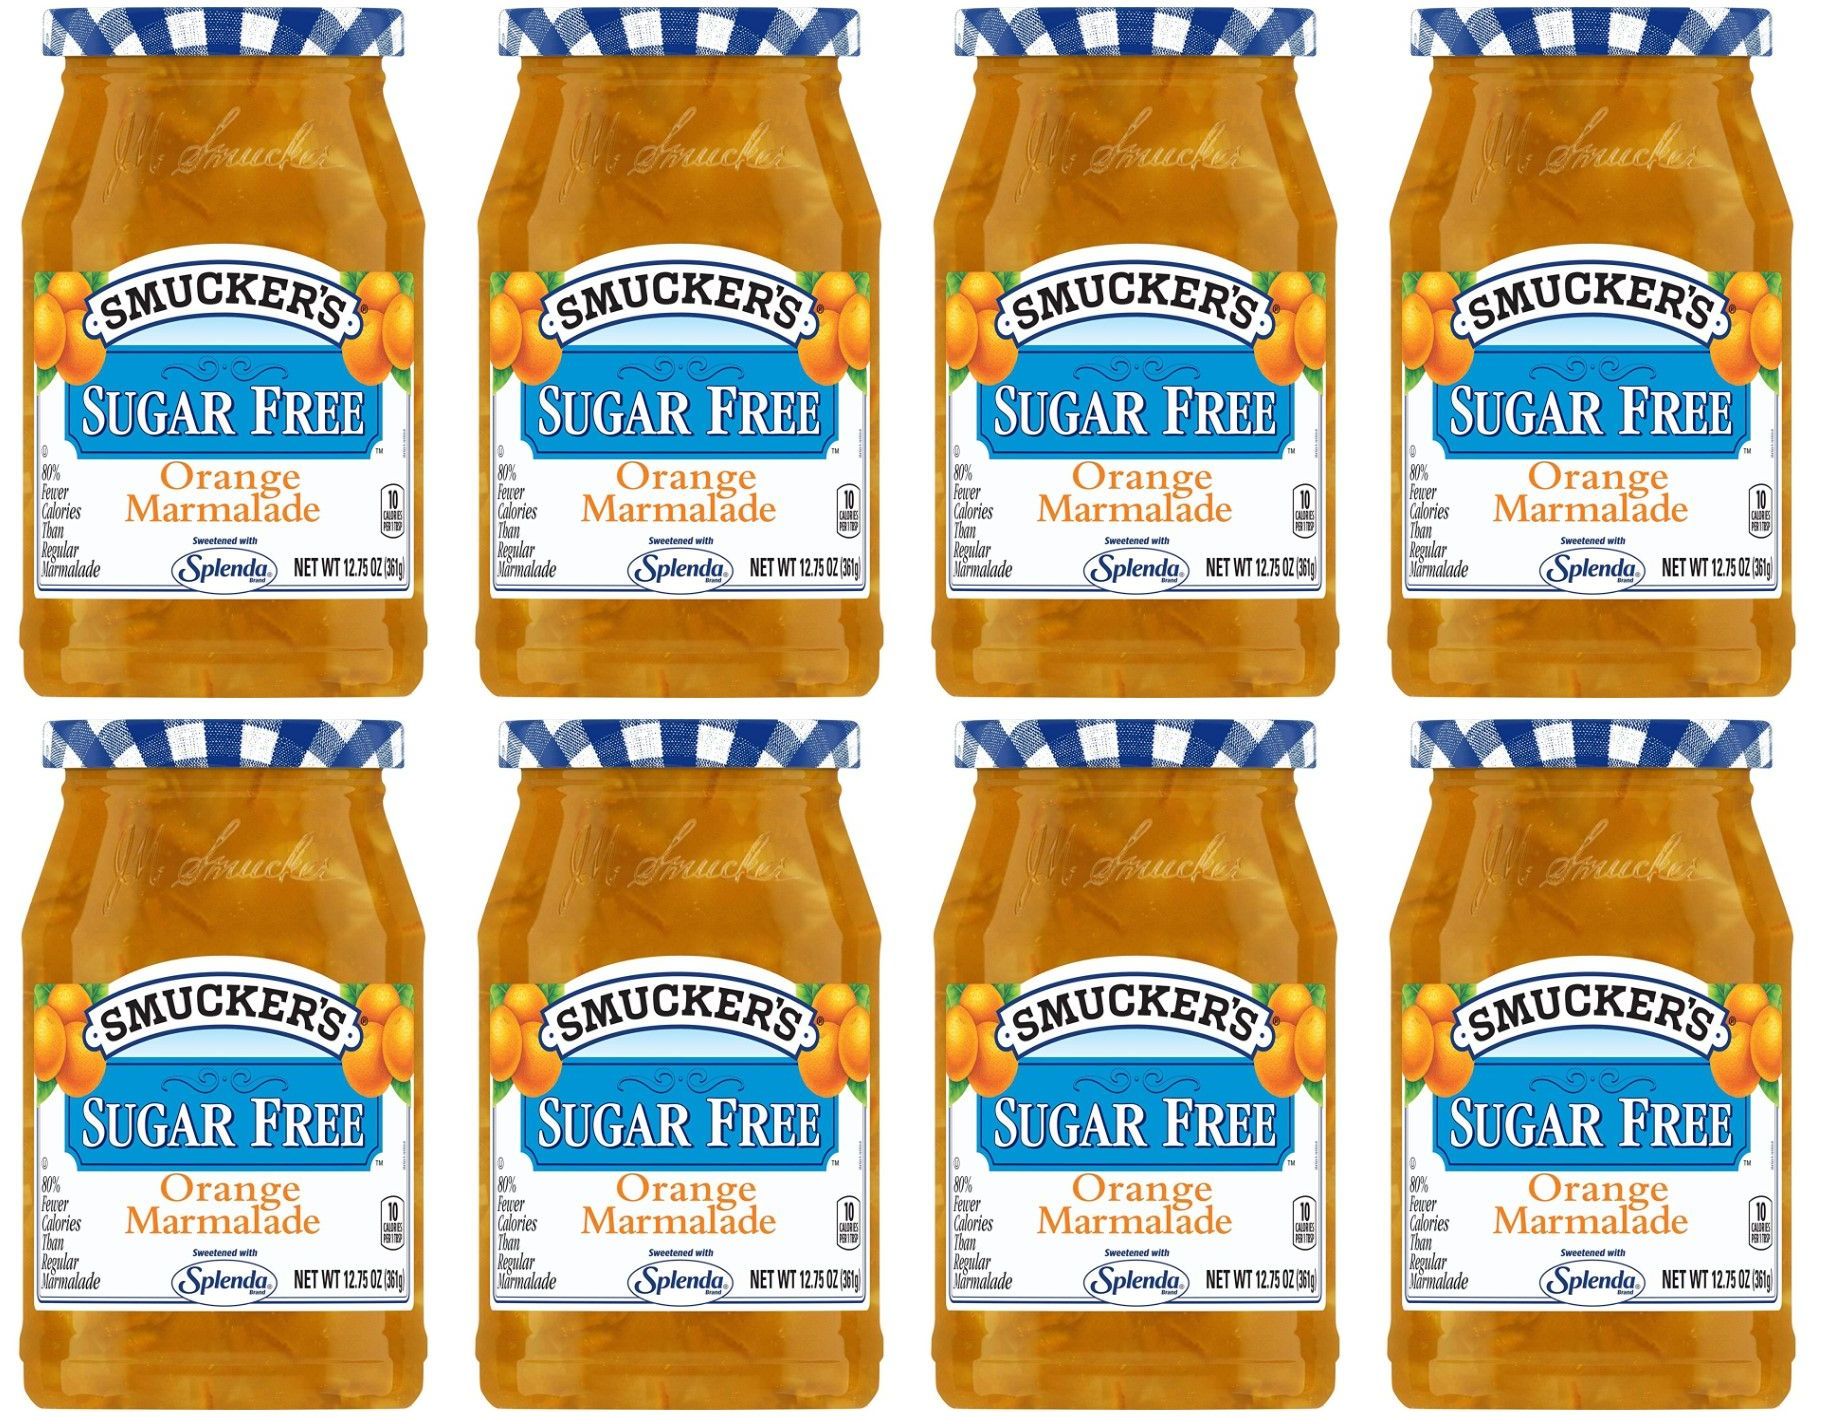 8-Pack 12.75-Oz Smucker's Sugar Free Orange Marmalade $19.96 ($2.50 Each) & More w/ S&S + Free Shipping w/ Prime or $25+